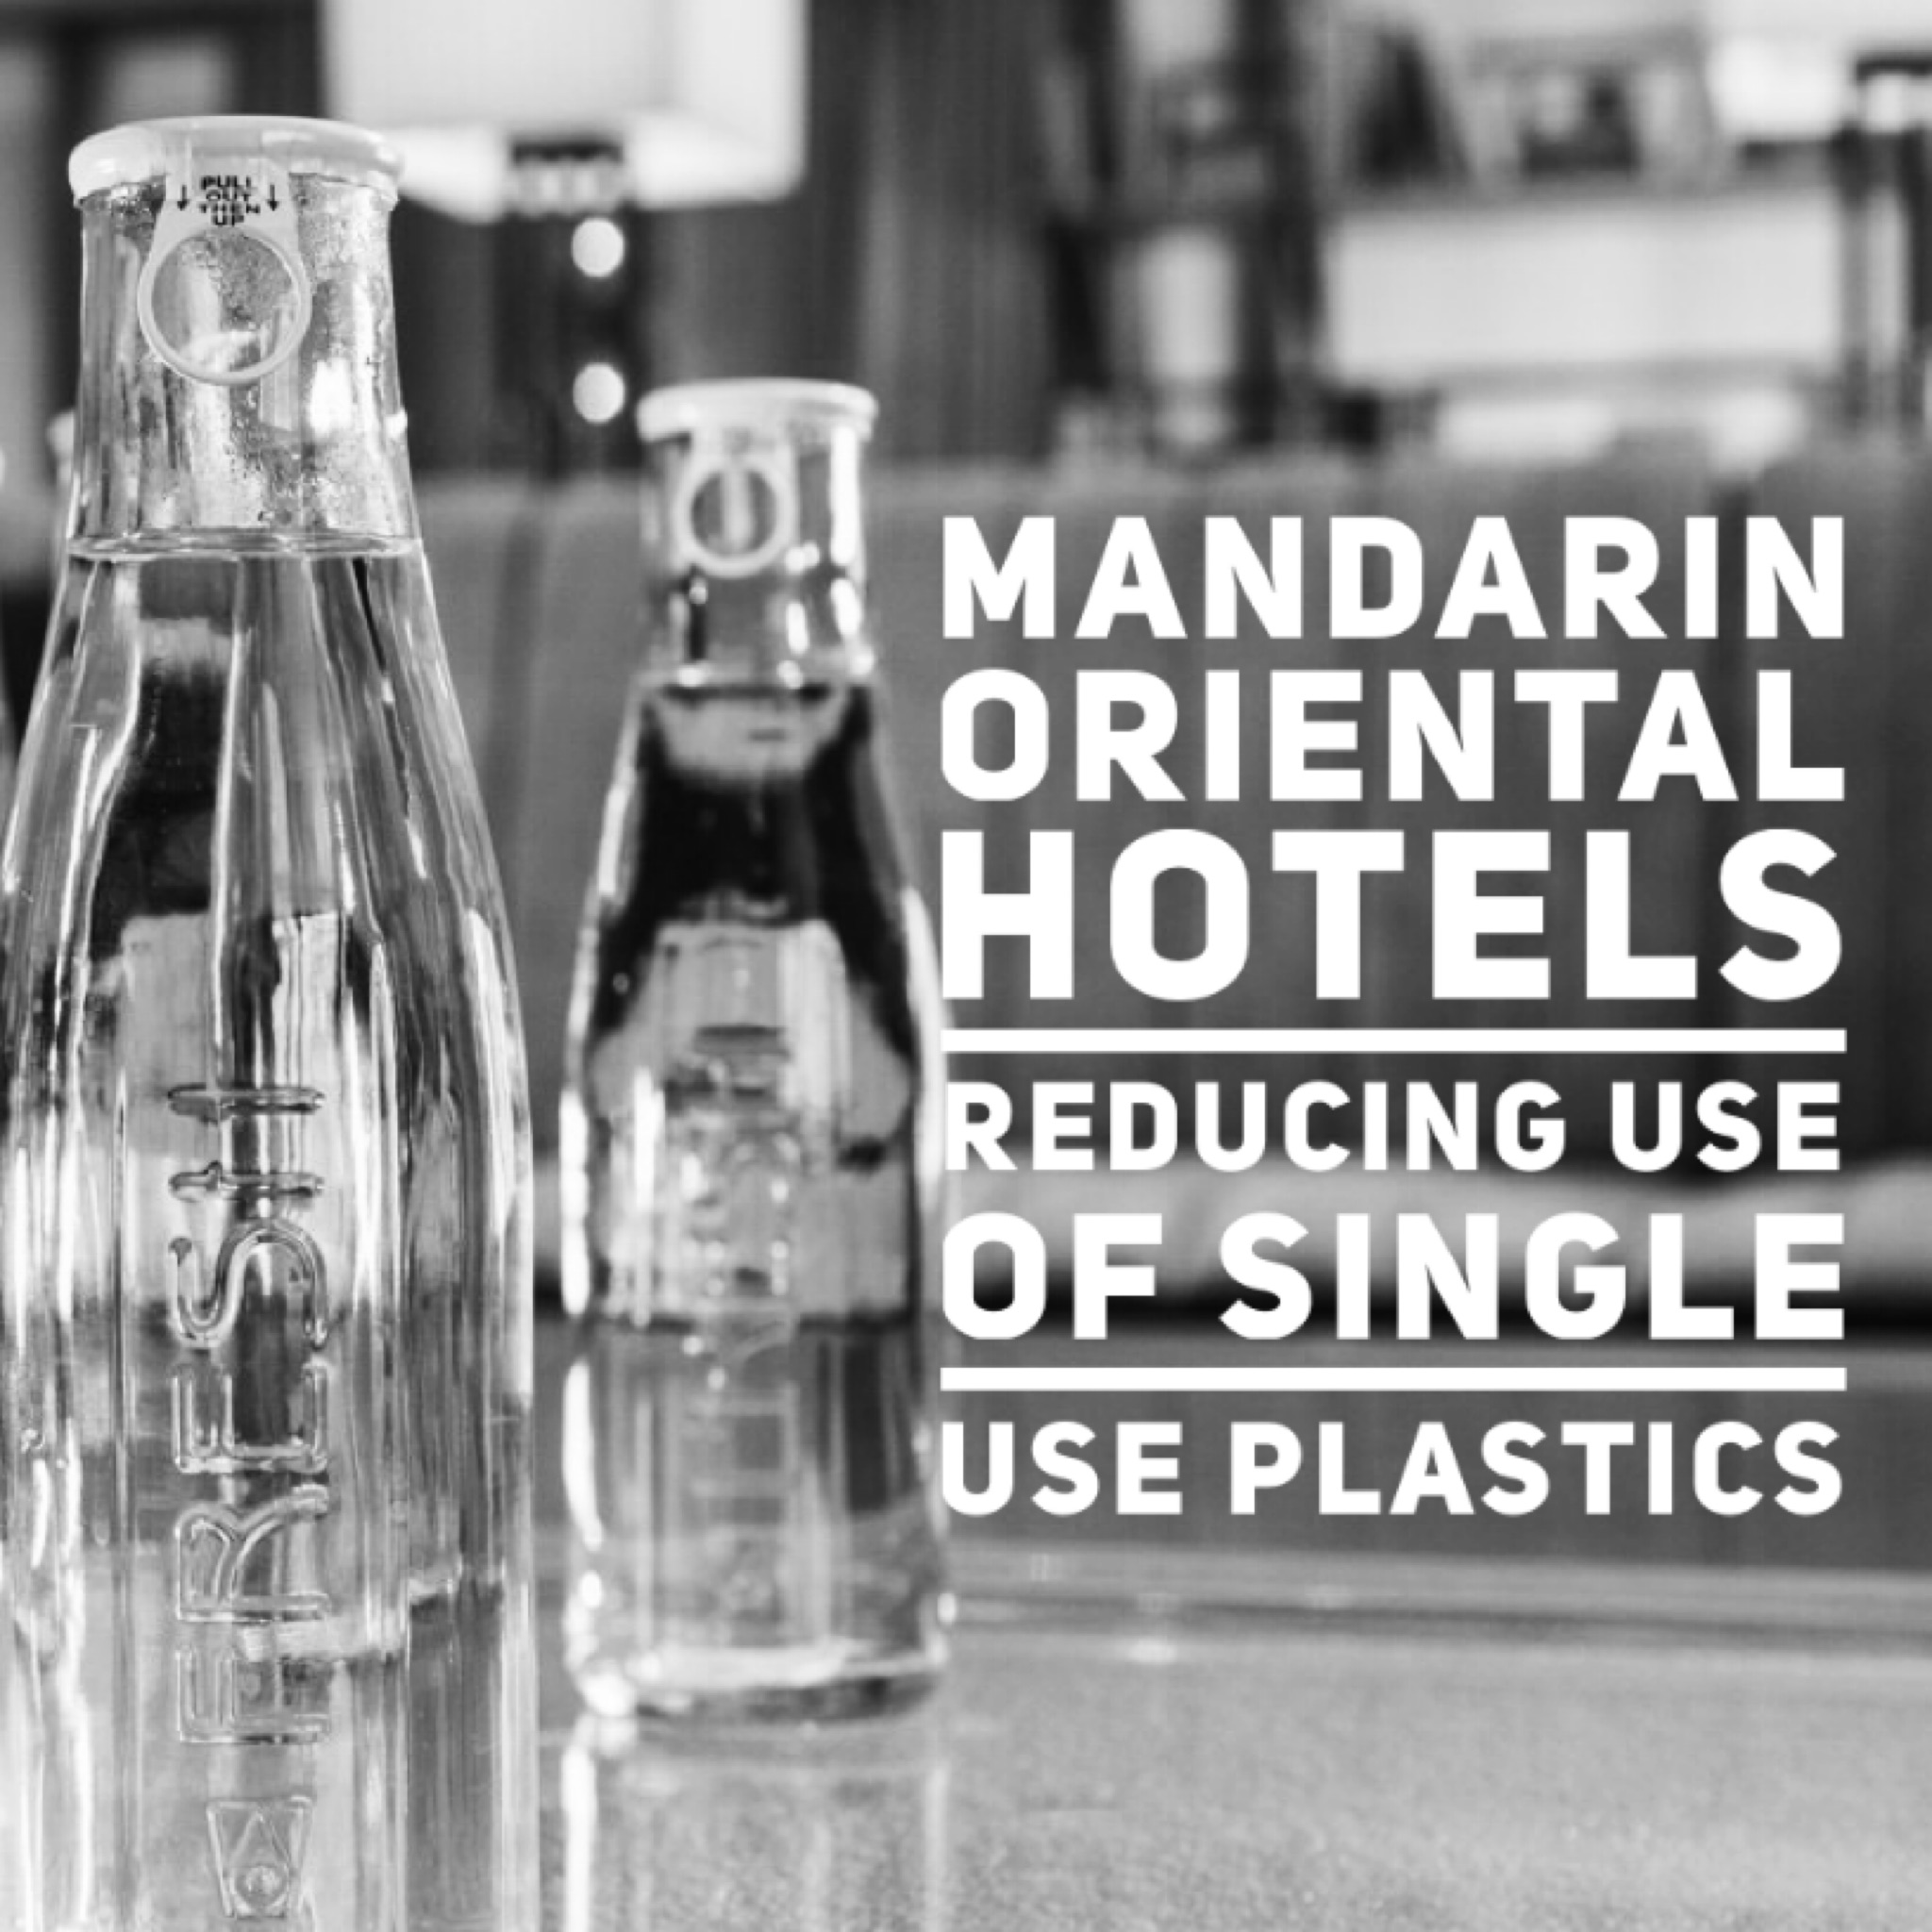 Mandarin Oriental Hotels Lead the Way for the Hospitality Industry to Ban Single Use Plastic